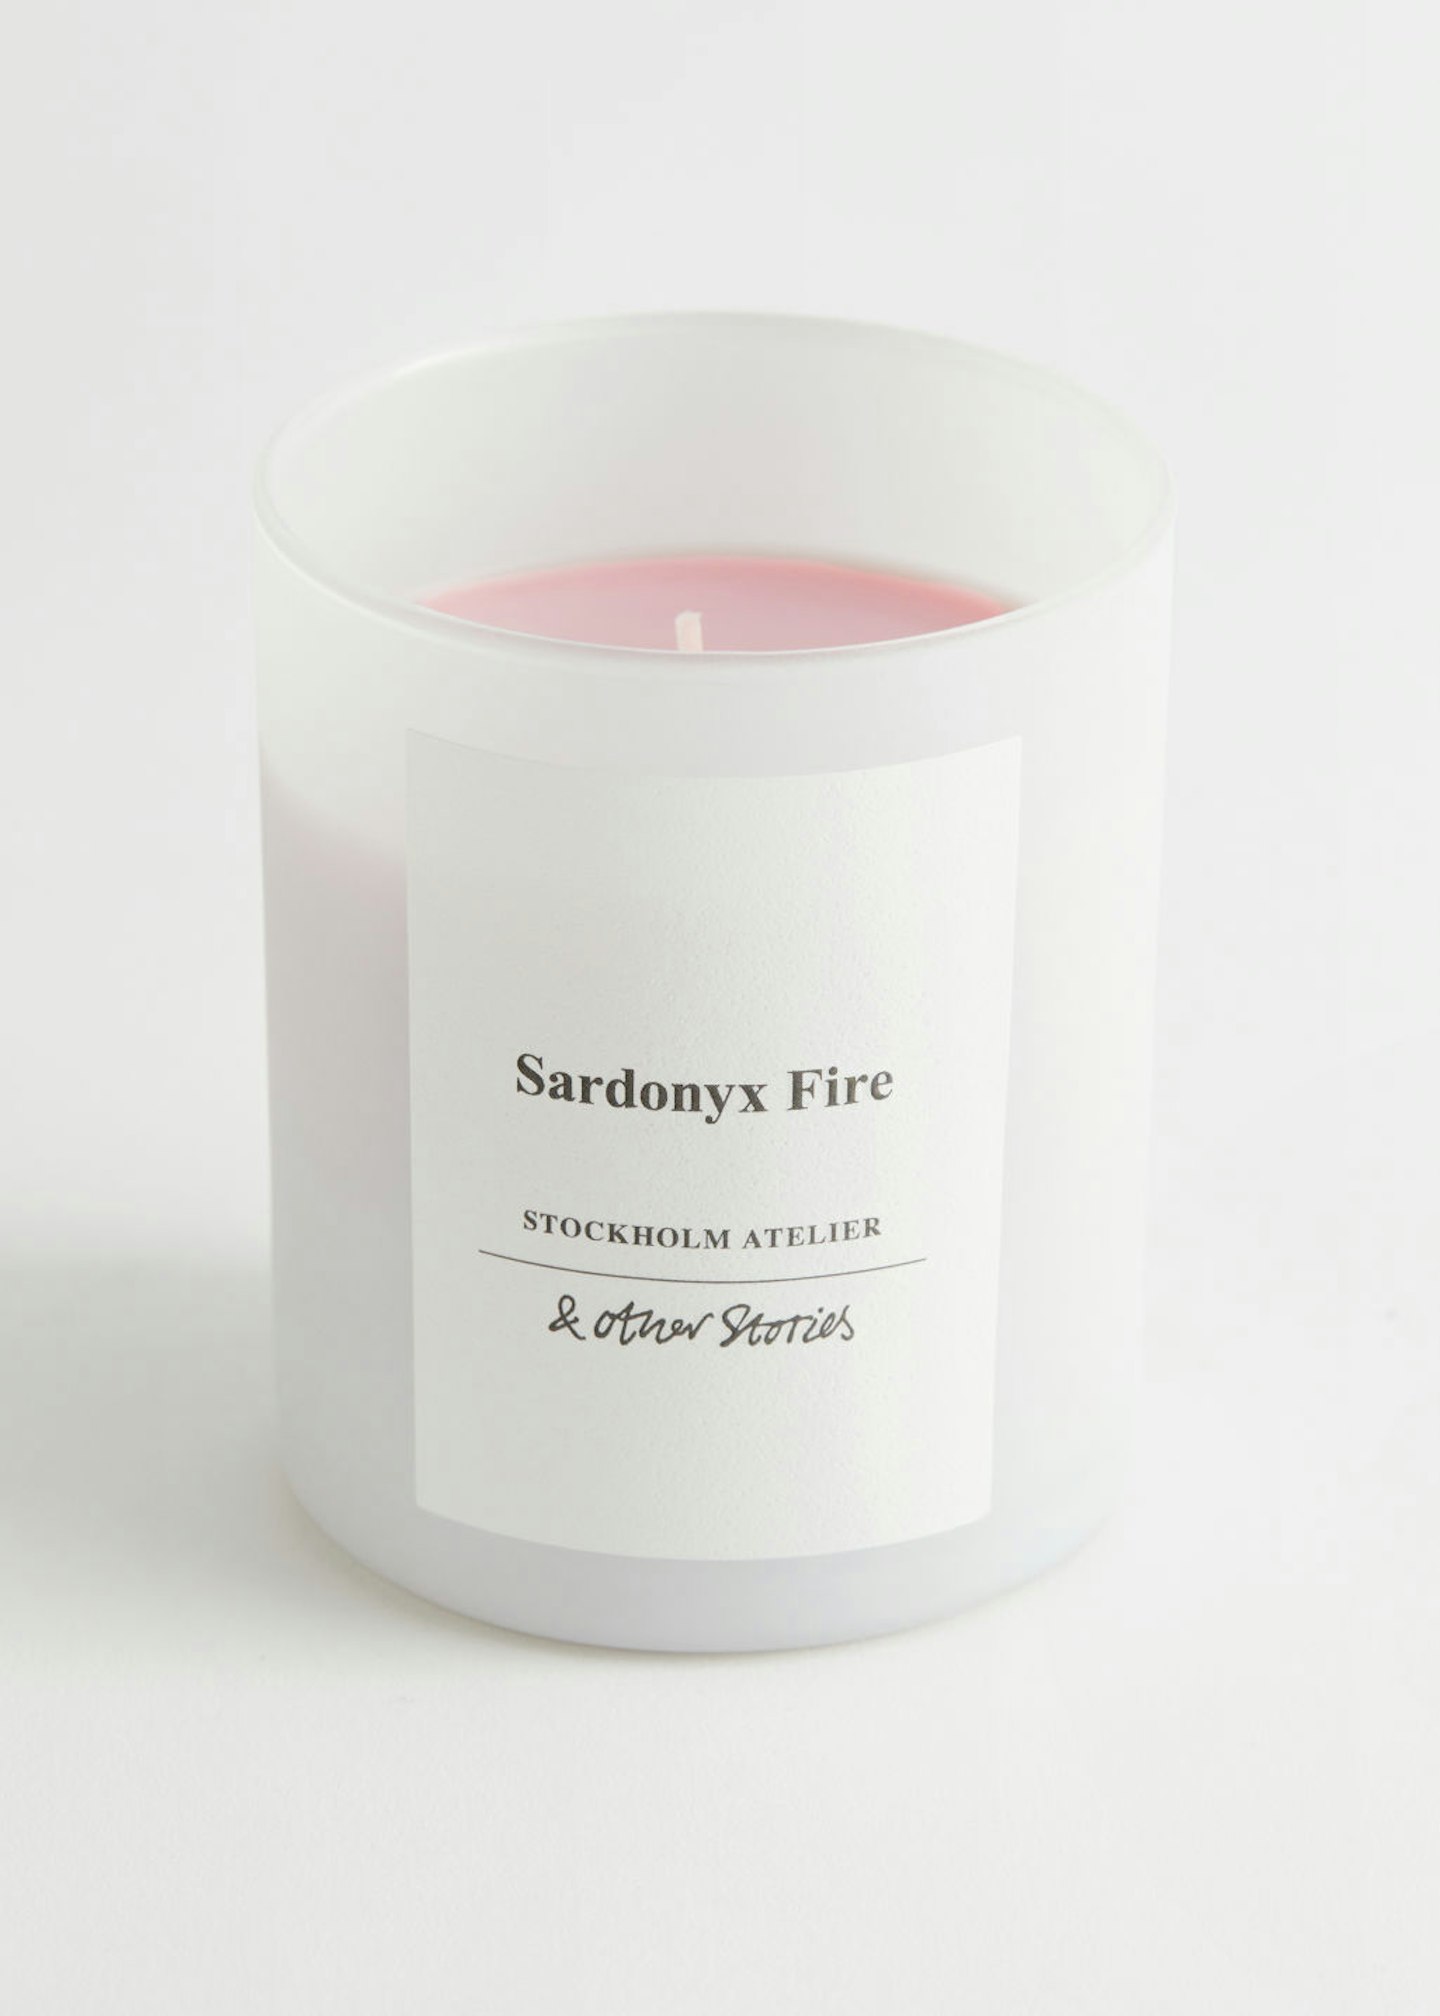 & Other Stories' Sardonyx Fire Scented Candle